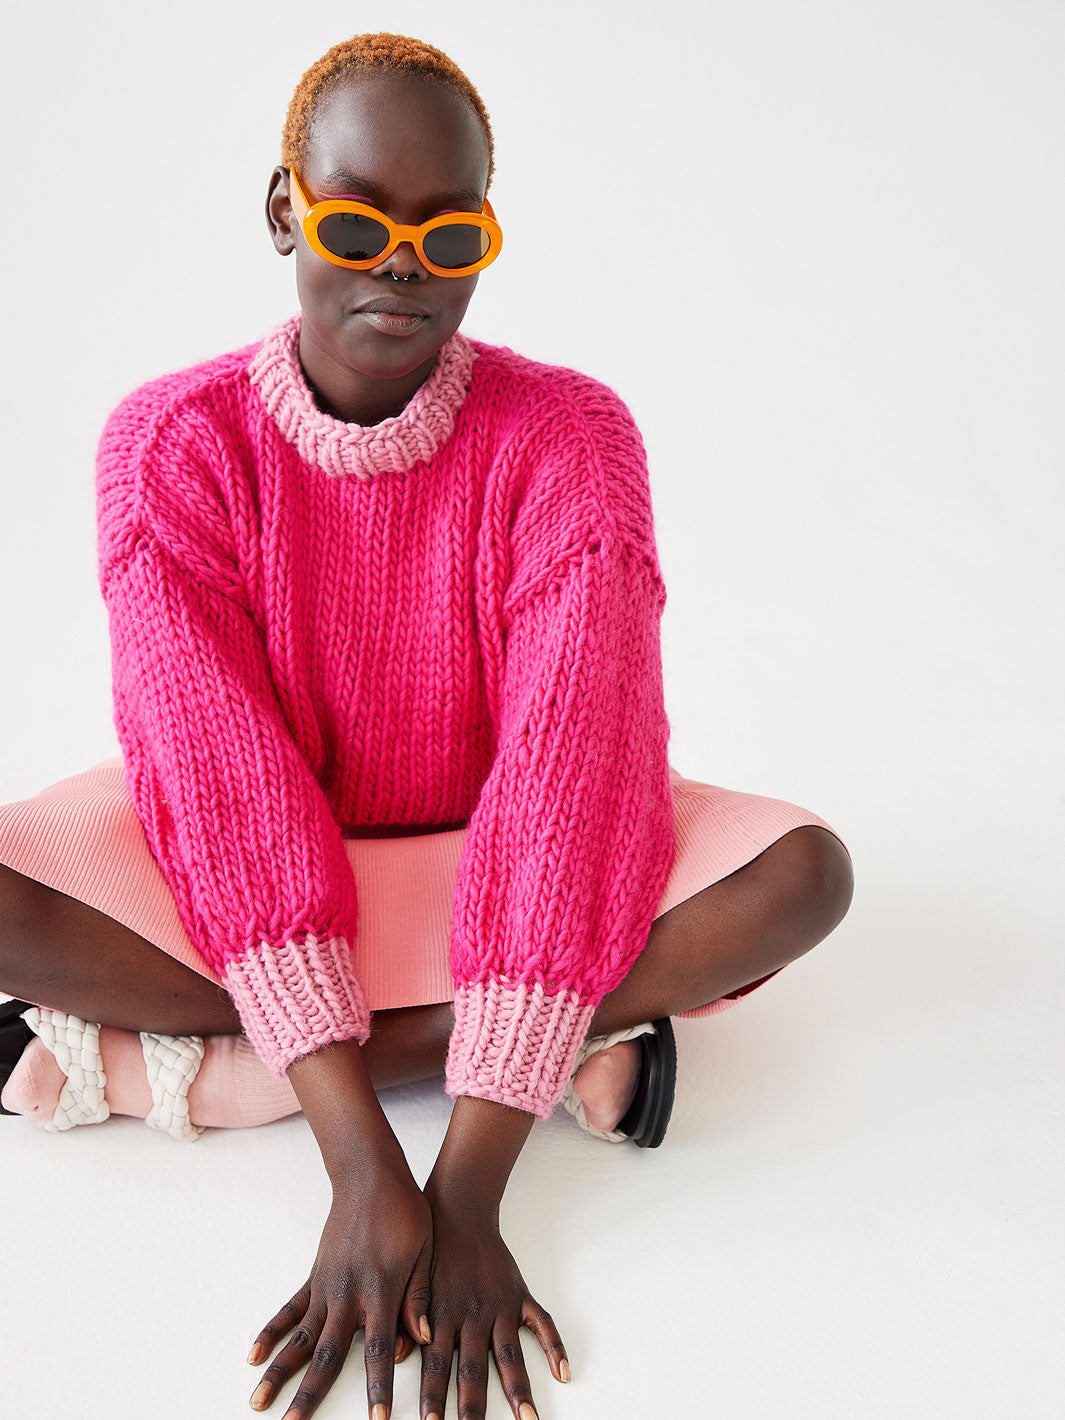 Girl sitting on the floor wearing sunglasses and chunky knitted bright pink jumper